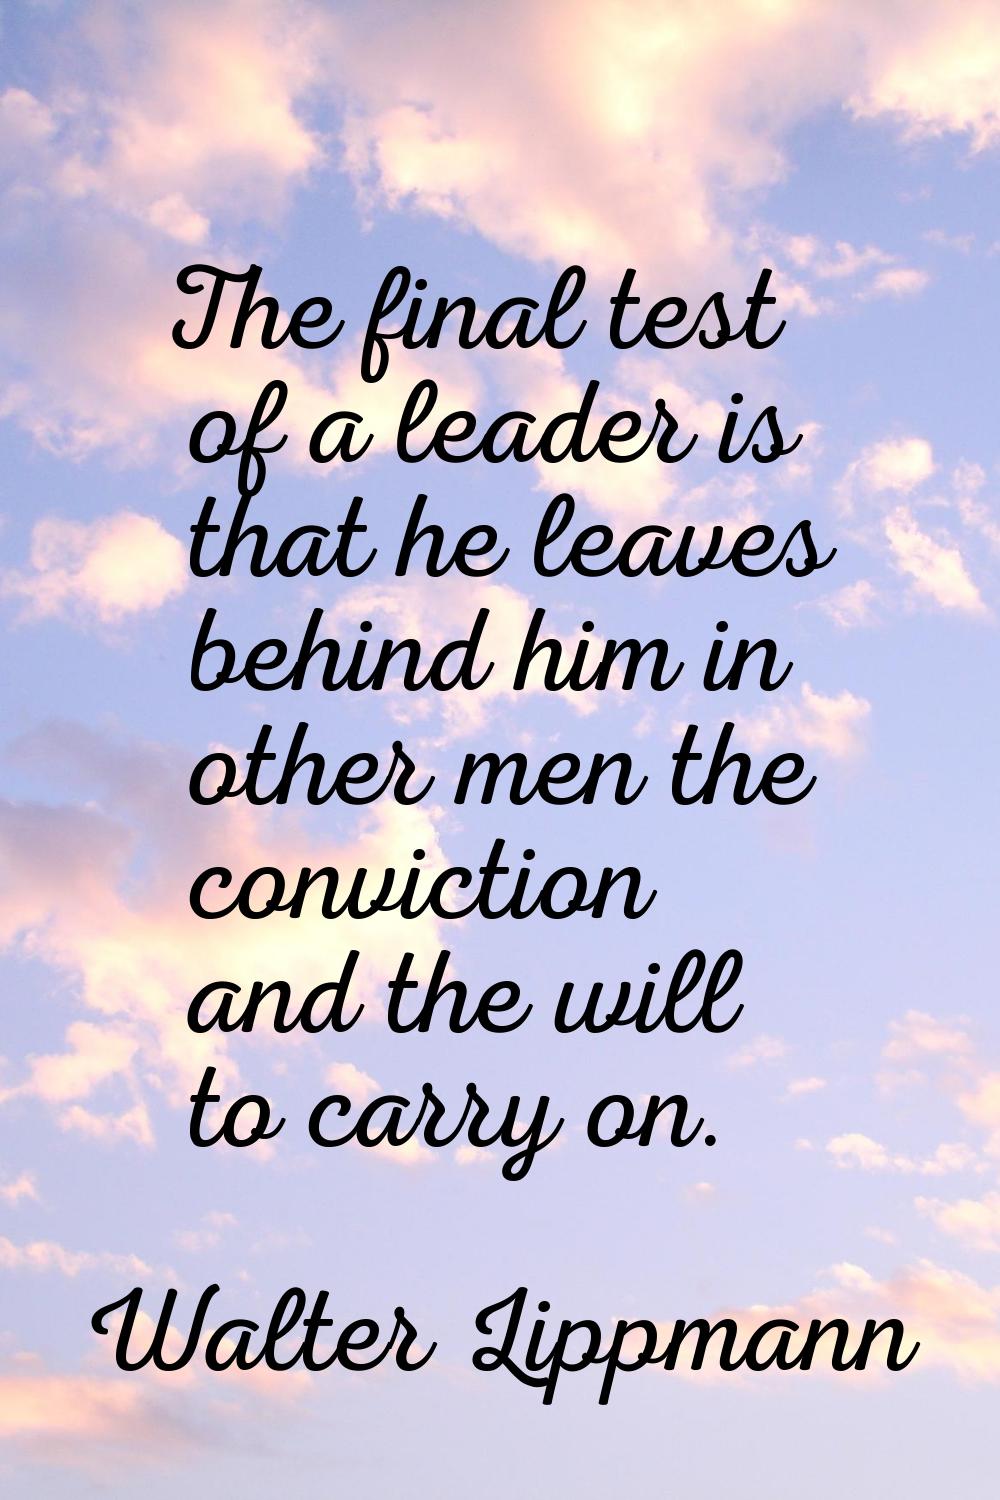 The final test of a leader is that he leaves behind him in other men the conviction and the will to